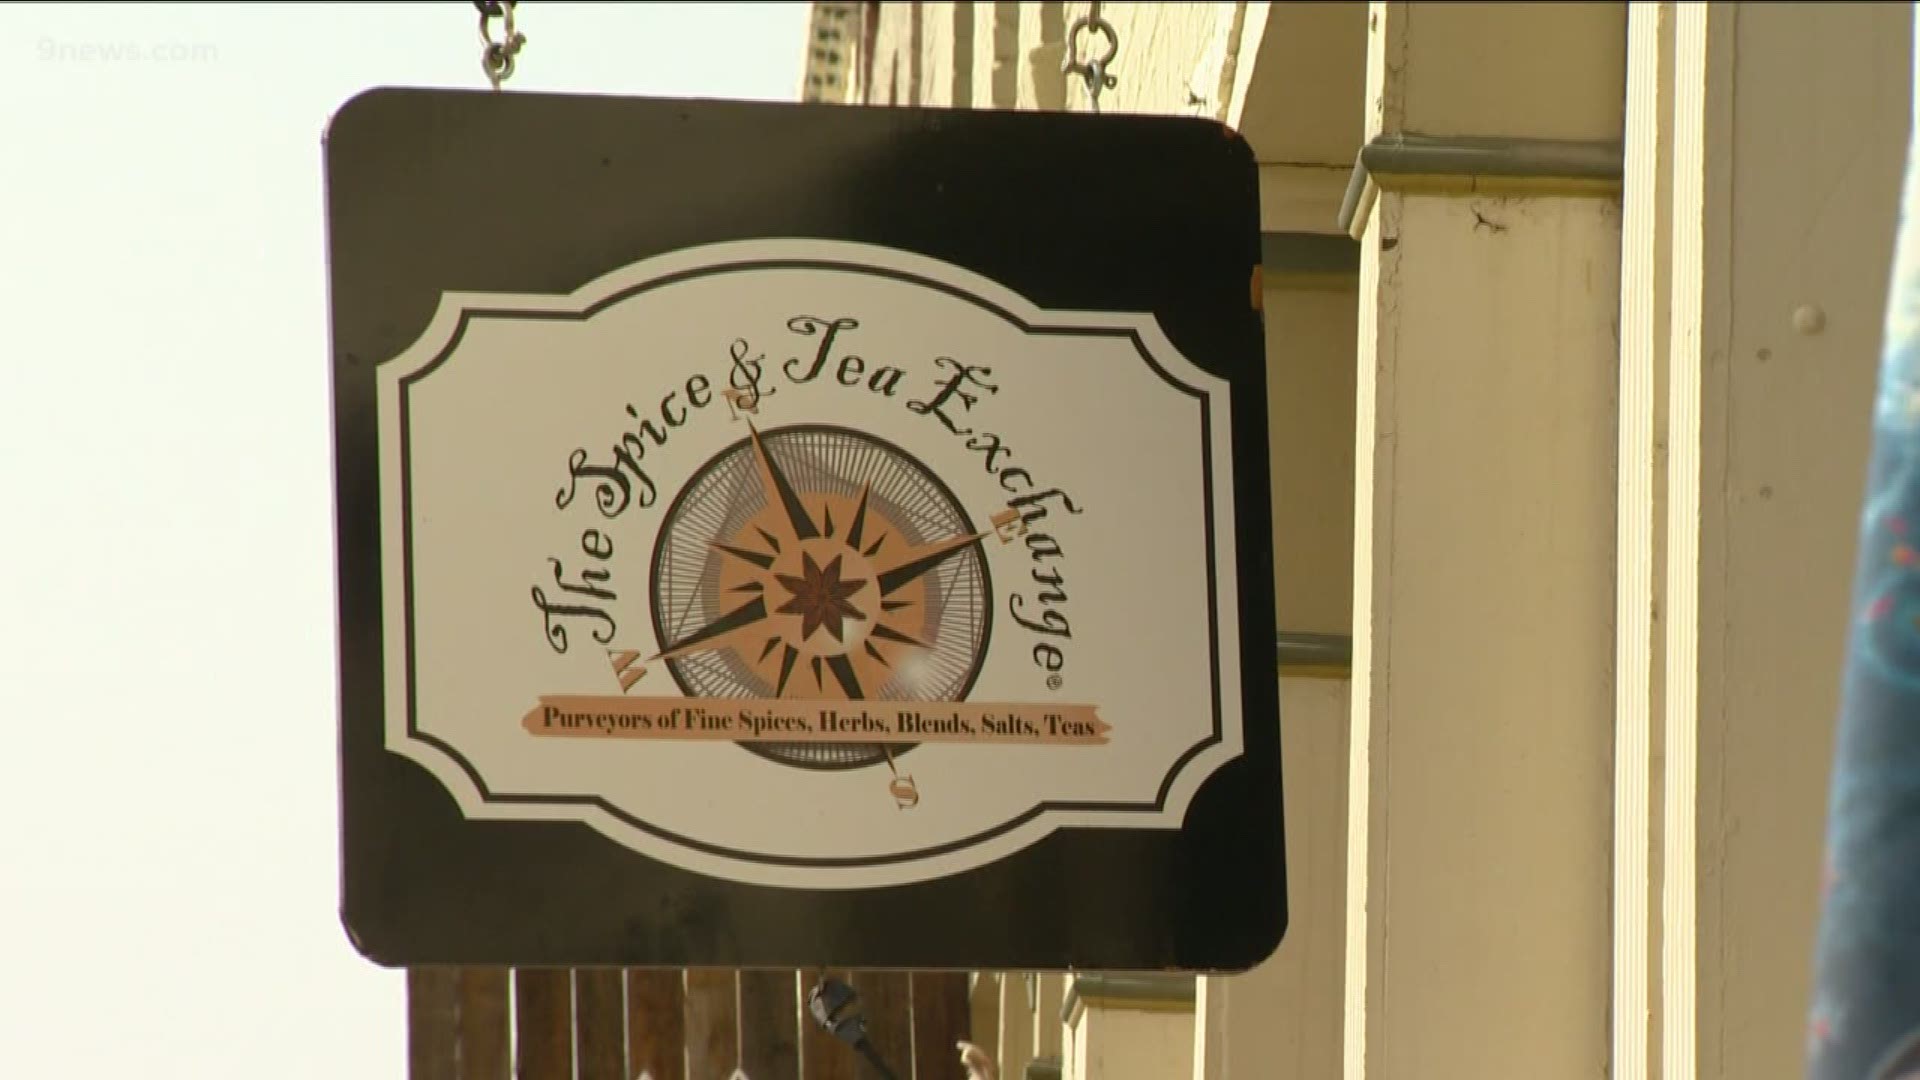 Sadie Peak, owner of The Spice & Tea Exchange, said she lost 80% of her business because of the closure.